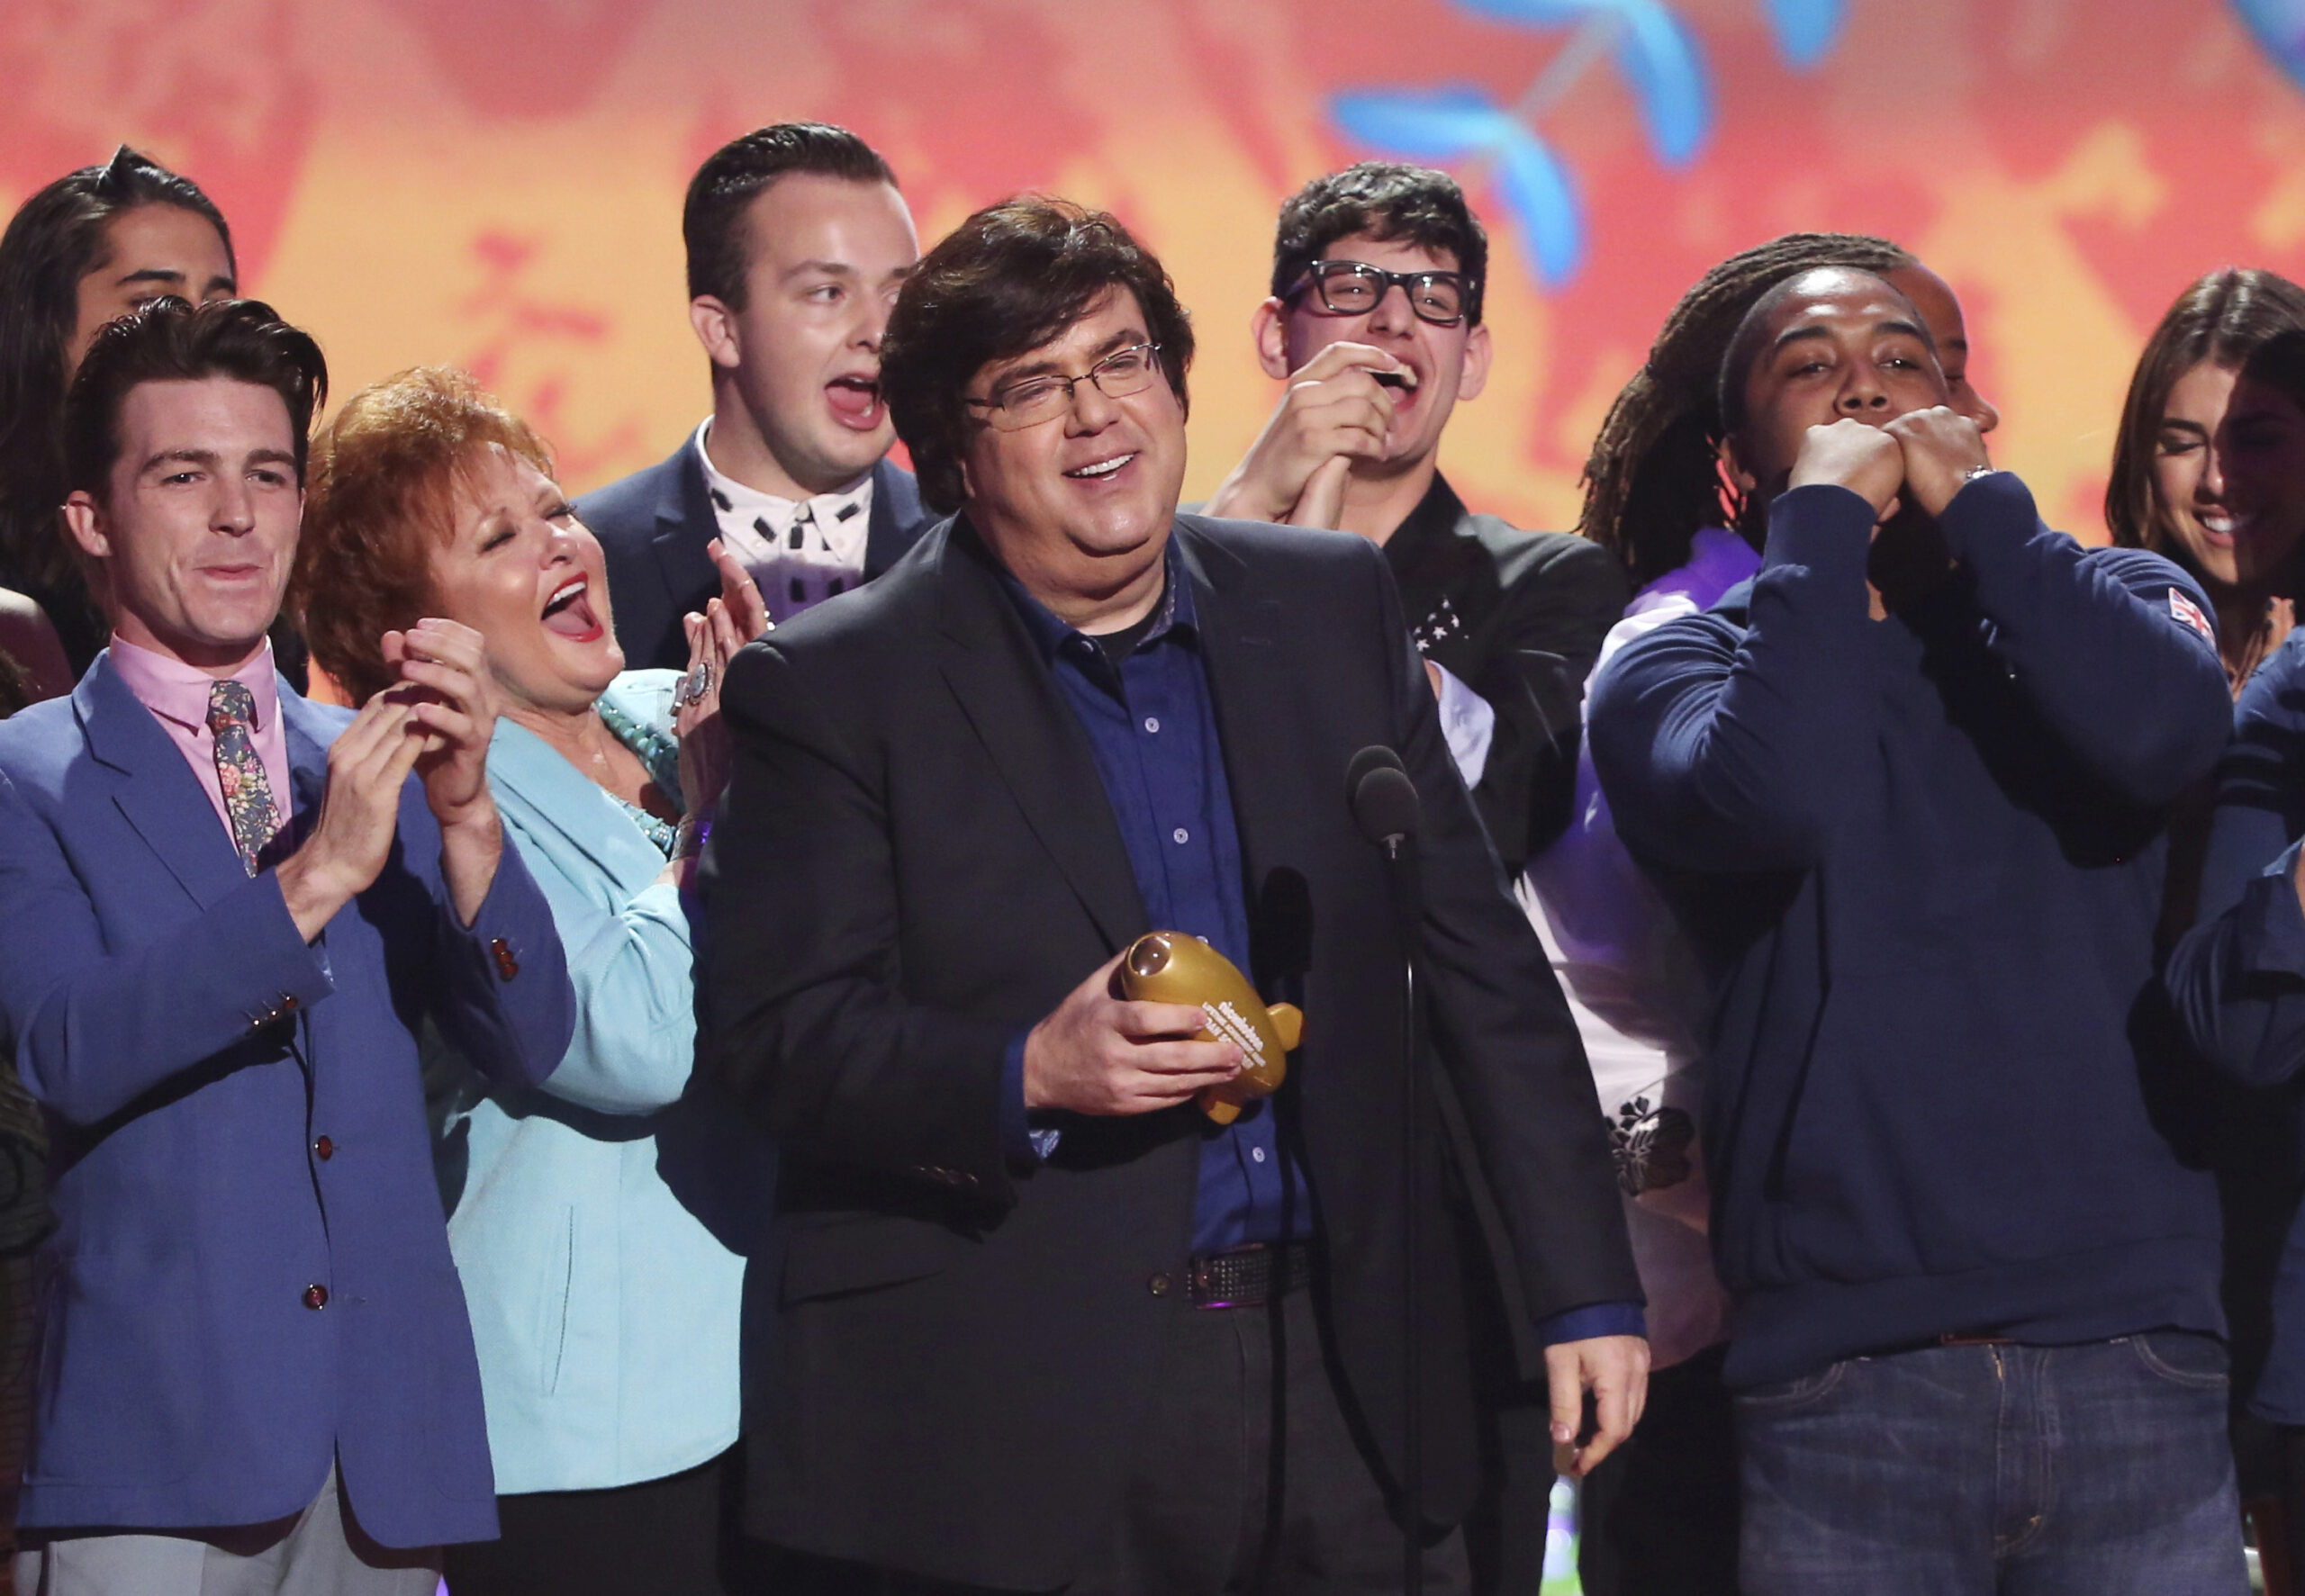 FILE - In this March 29, 2014, file photo, Dan Schneider, center, accepts the lifetime achievement award at the 27th annual Kids' Choice Awards at the Galen Center in Los Angeles. Nickelodeon is breaking ties with Schneider, the creator of some of its top shows, including “Henry Danger” and “iCarly.” In a joint statement, Nickelodeon, Schneider and his production company, Schneider’s Bakery, agreed it “is a natural time” to pursue other opportunities and projects since several Schneider’s Bakery projects are wrapping up. (Photo by Matt Sayles/Invision/AP, File)